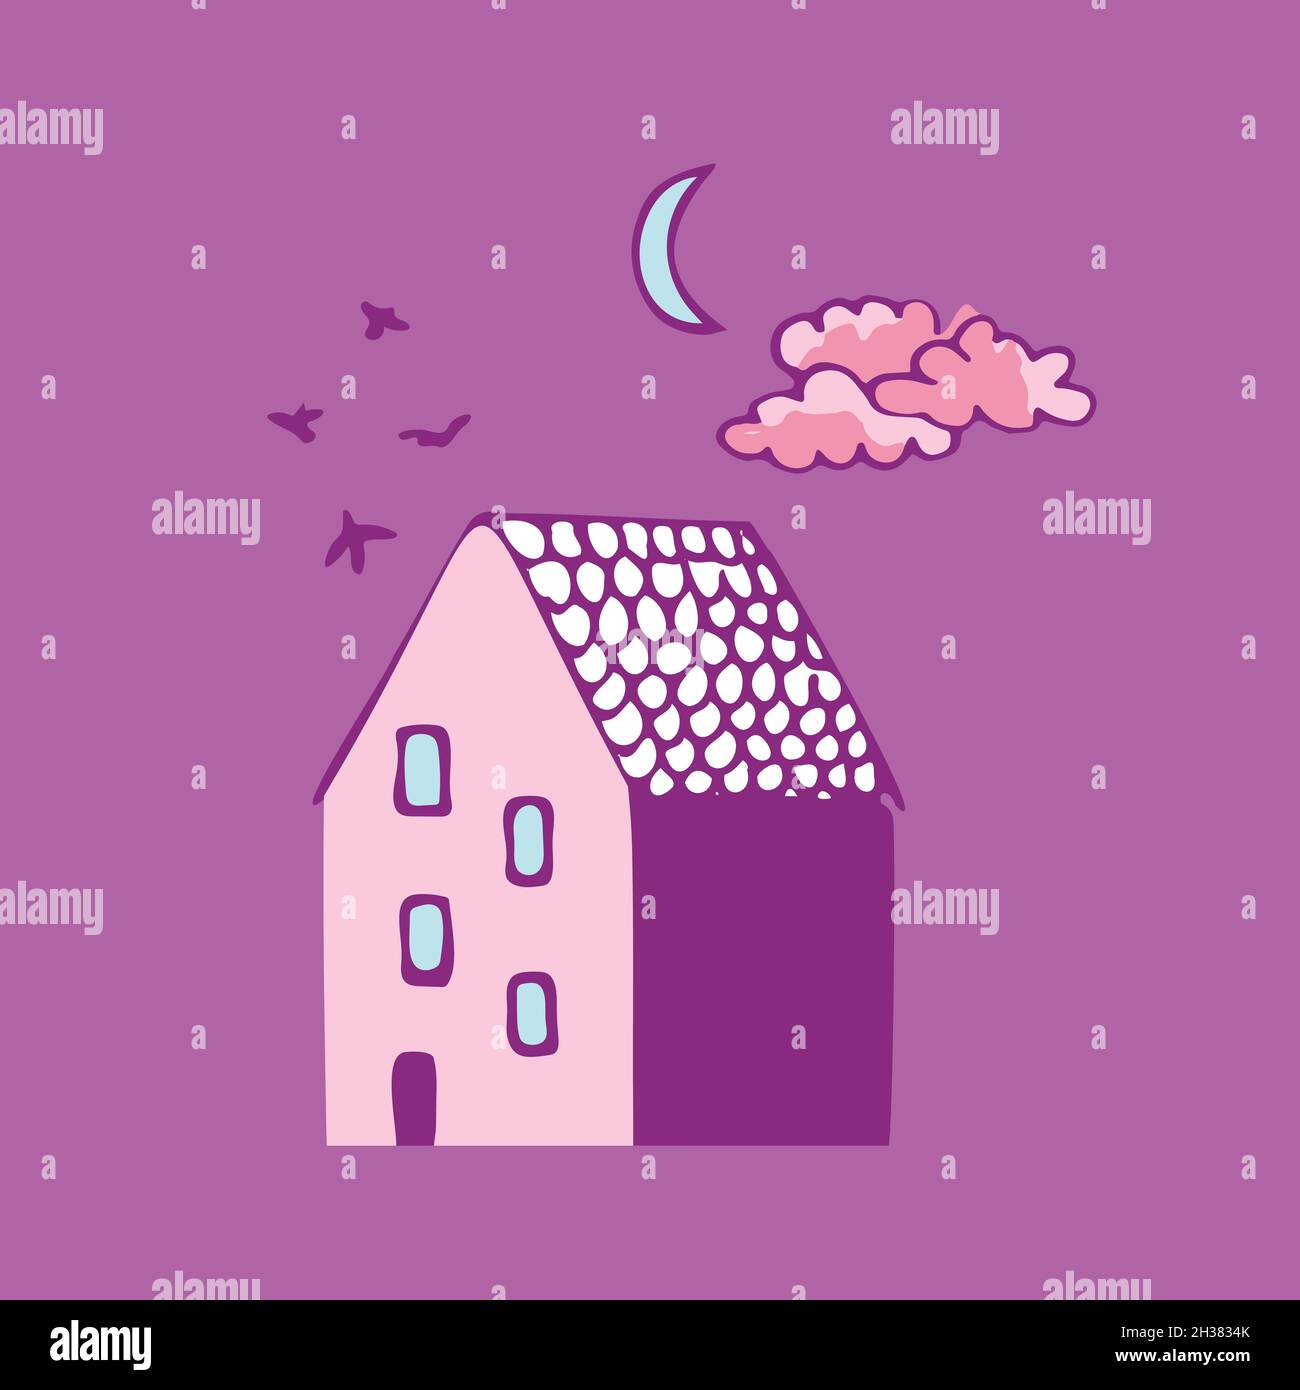 Vector illustration of a house with birds and sky, stars and moon. Doodle design elements.  Stock Vector